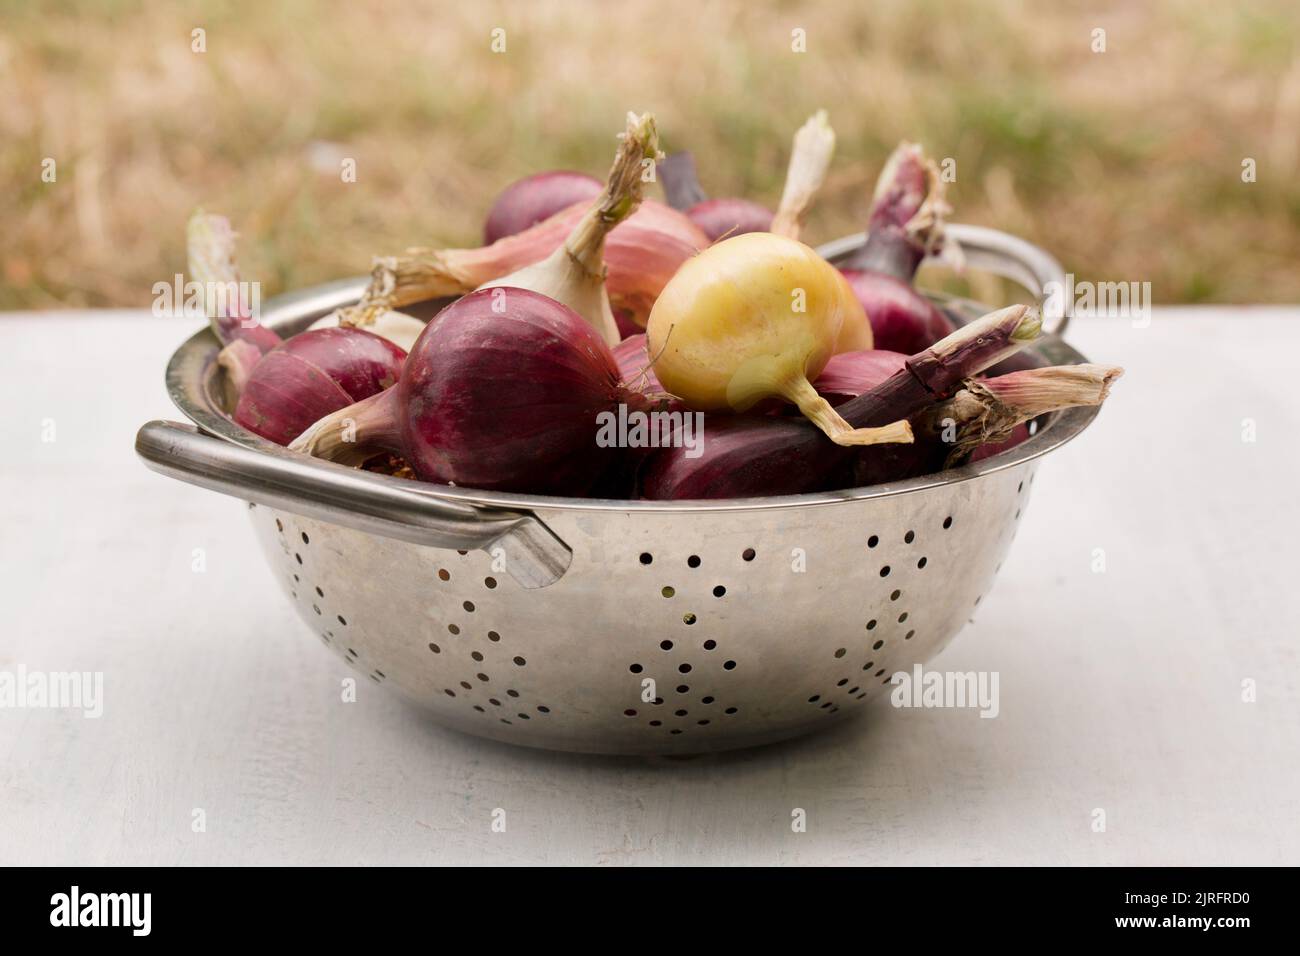 Purple, white and golden onions in a metal sieve on a light background Stock Photo